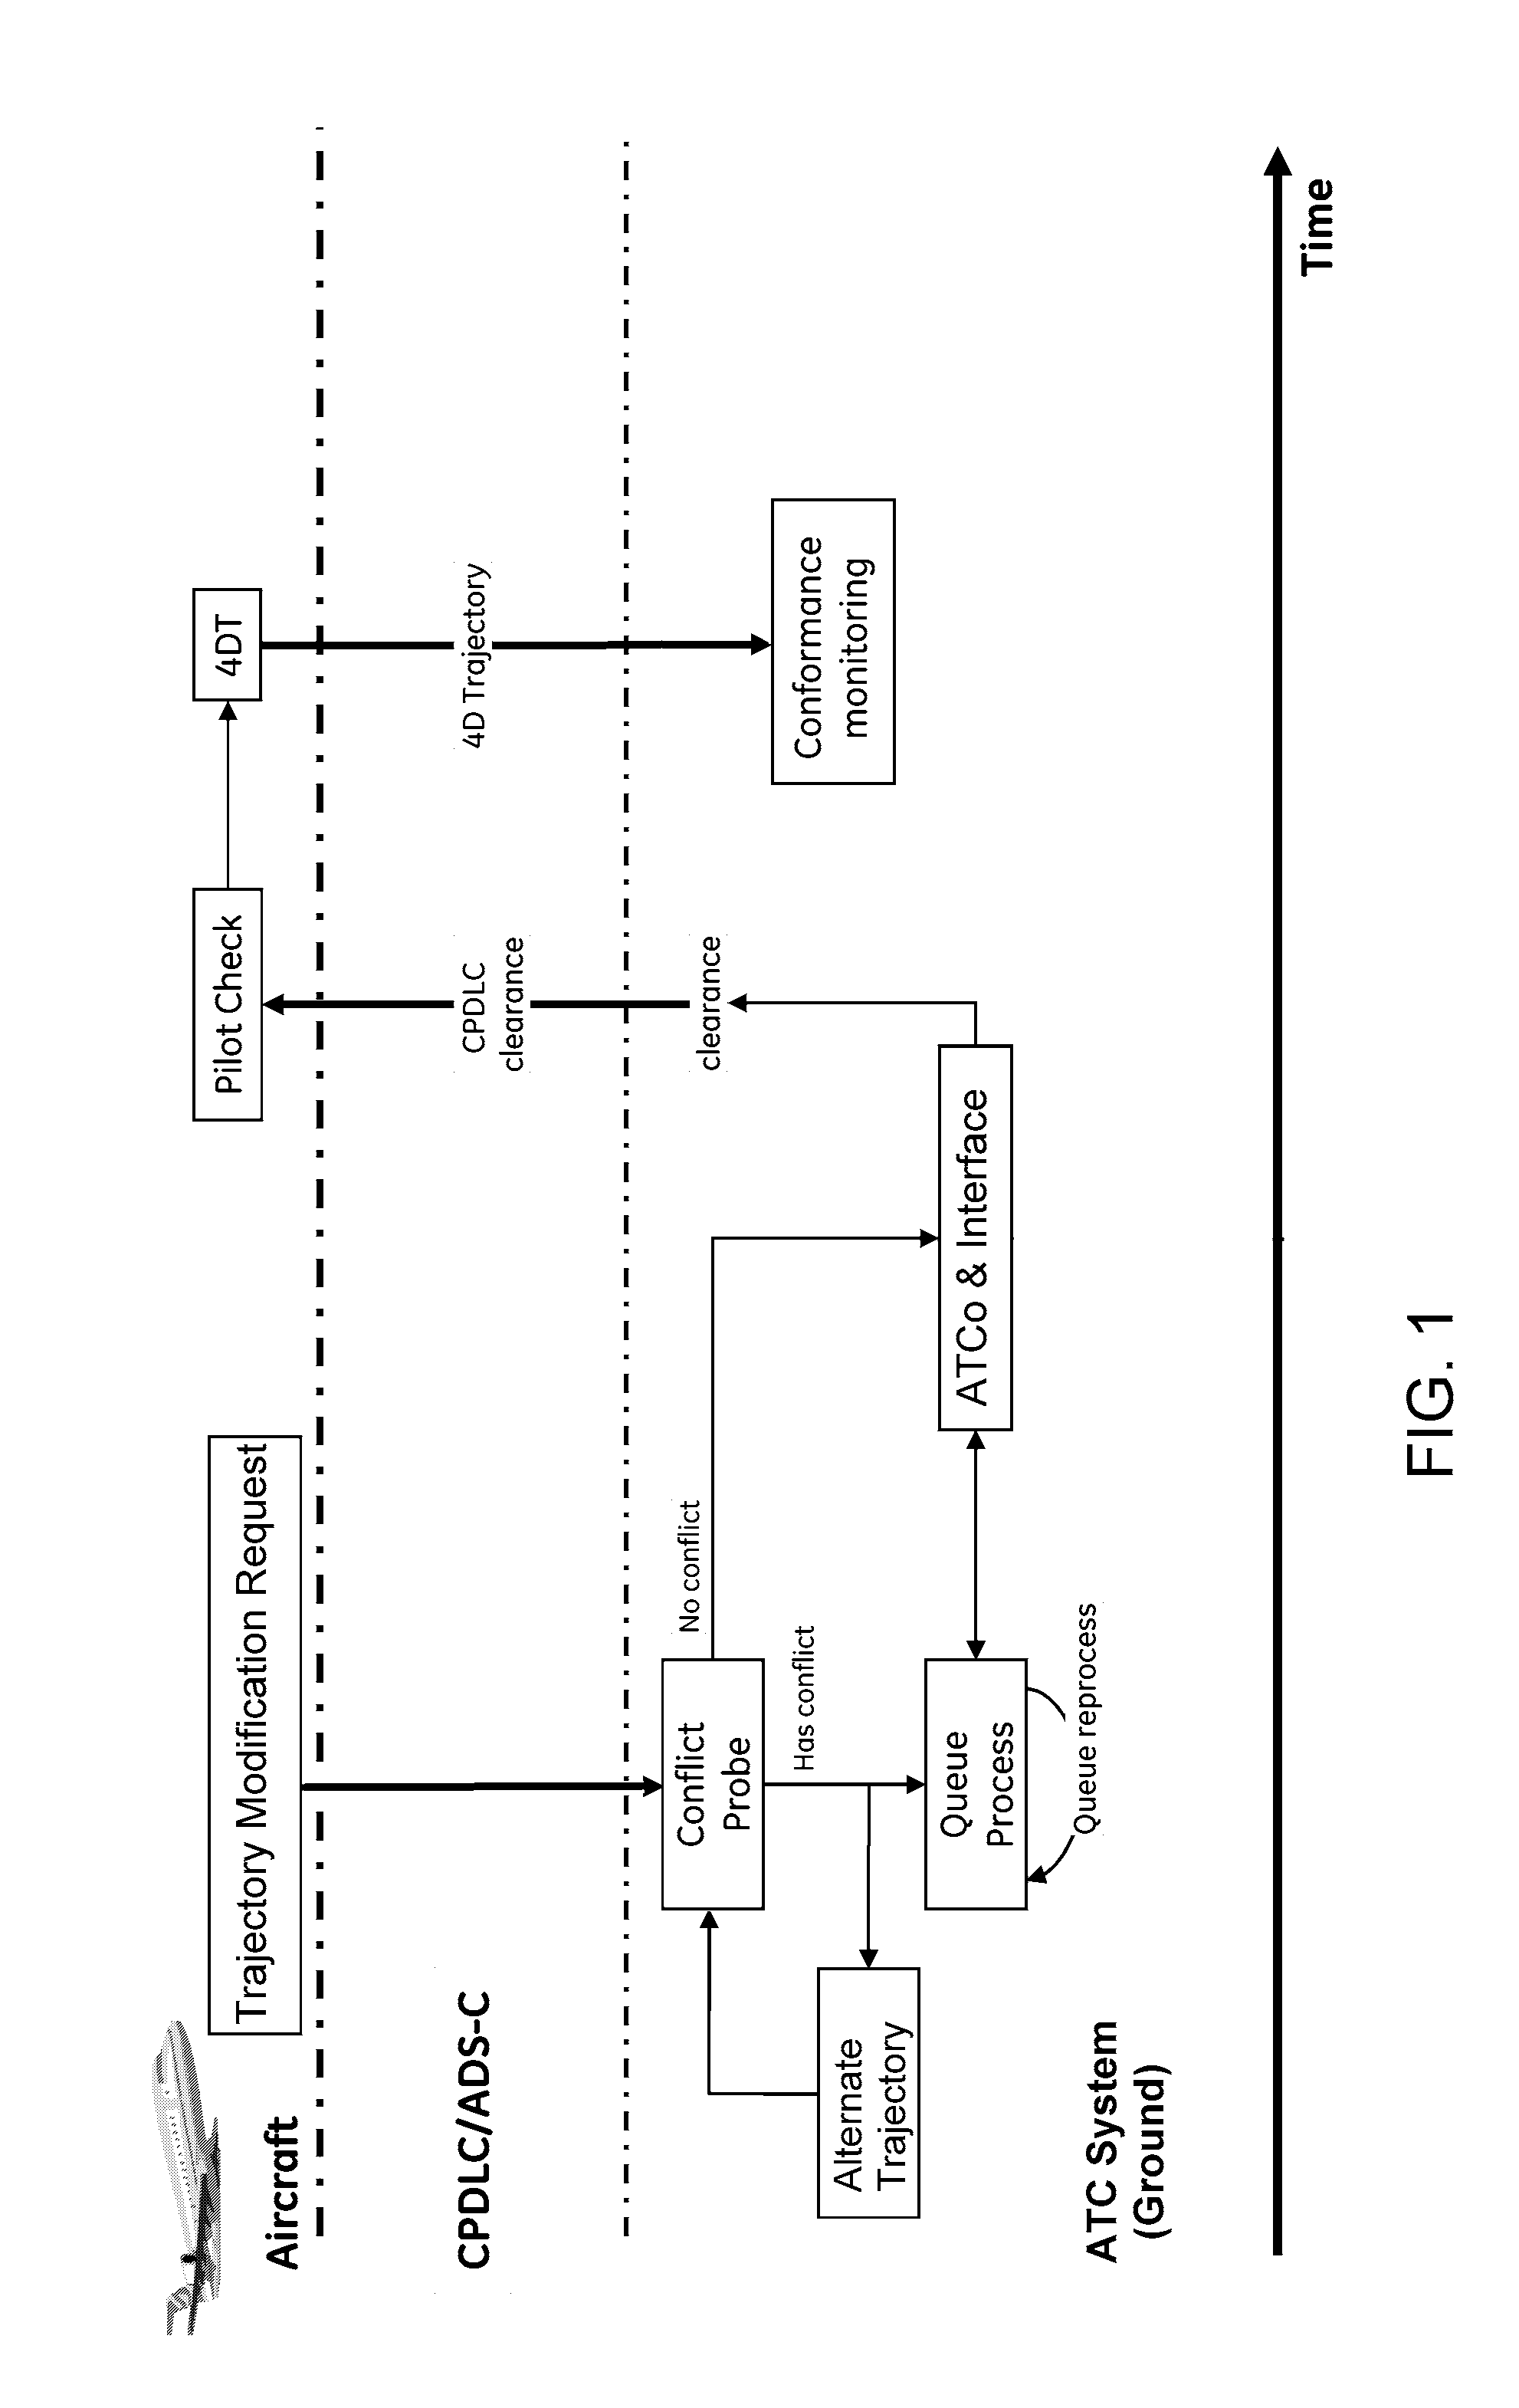 Methods and systems for managing air traffic